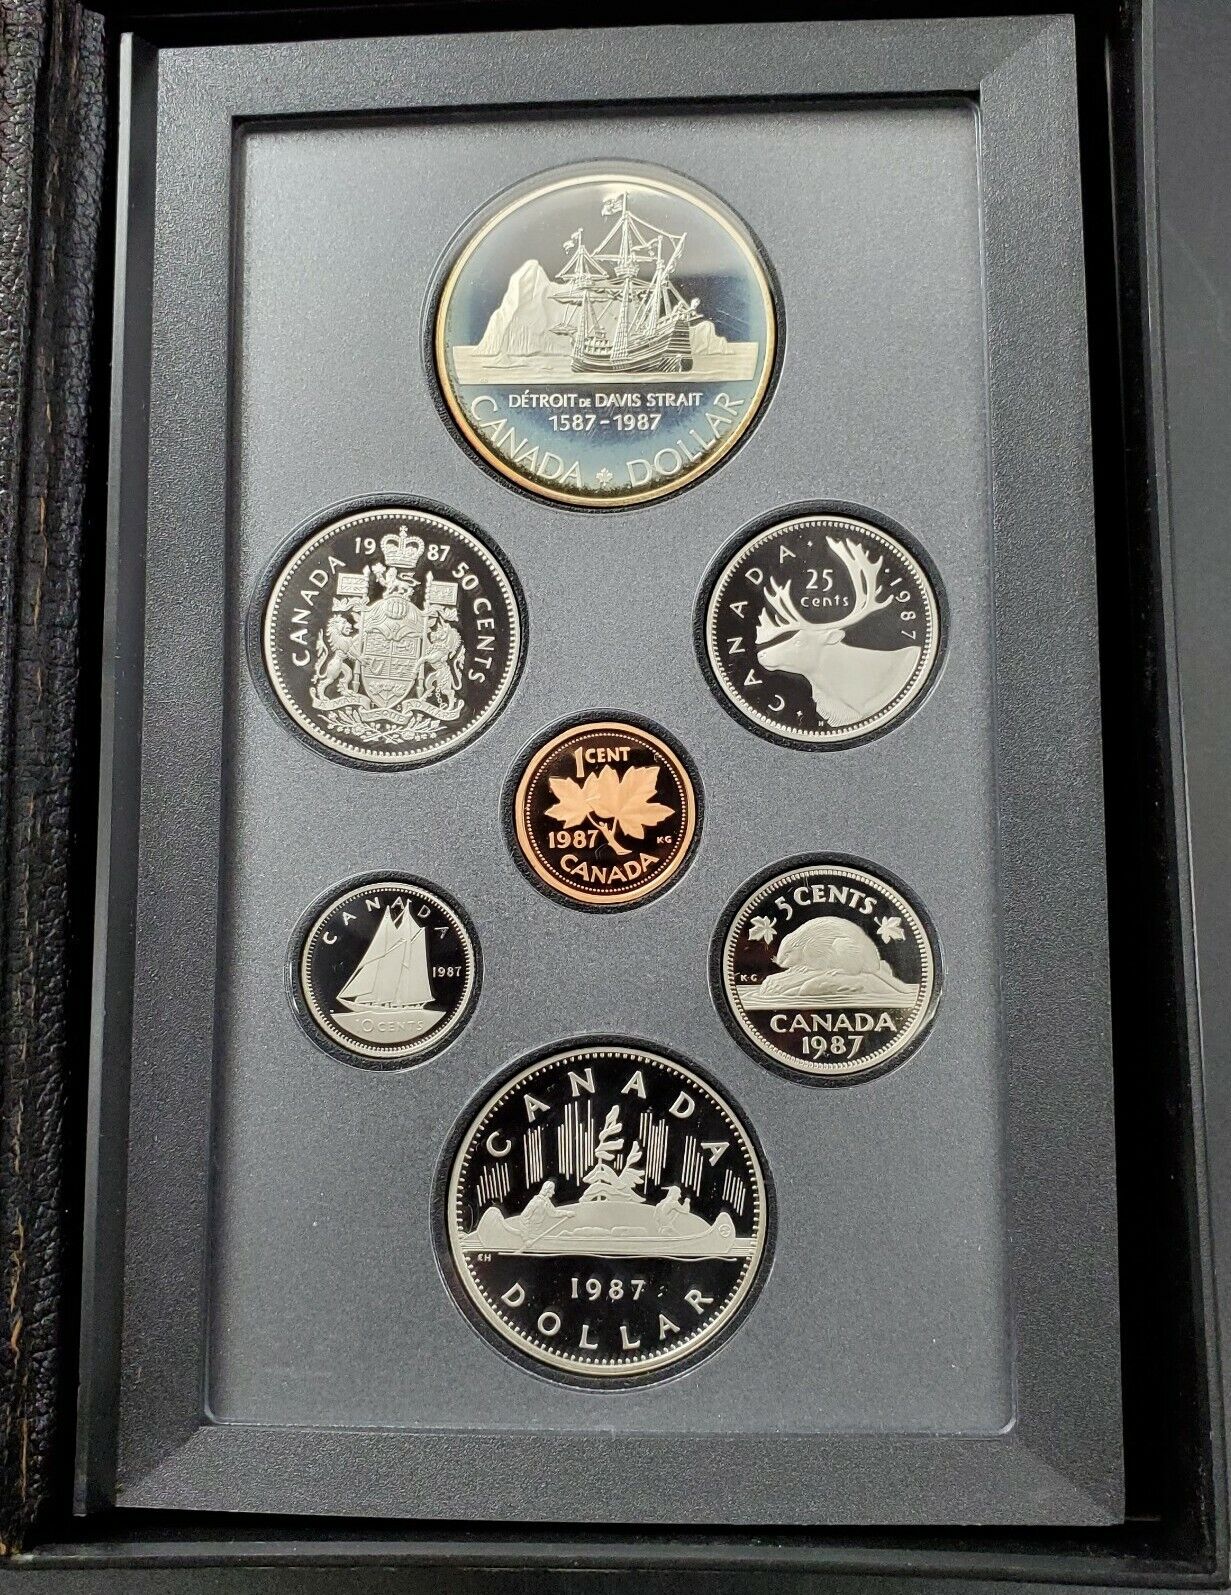 Canada 1987 RCM Prestige 7 Coin Proof Set Double Dollar OGP PQ TONING SILVER $1